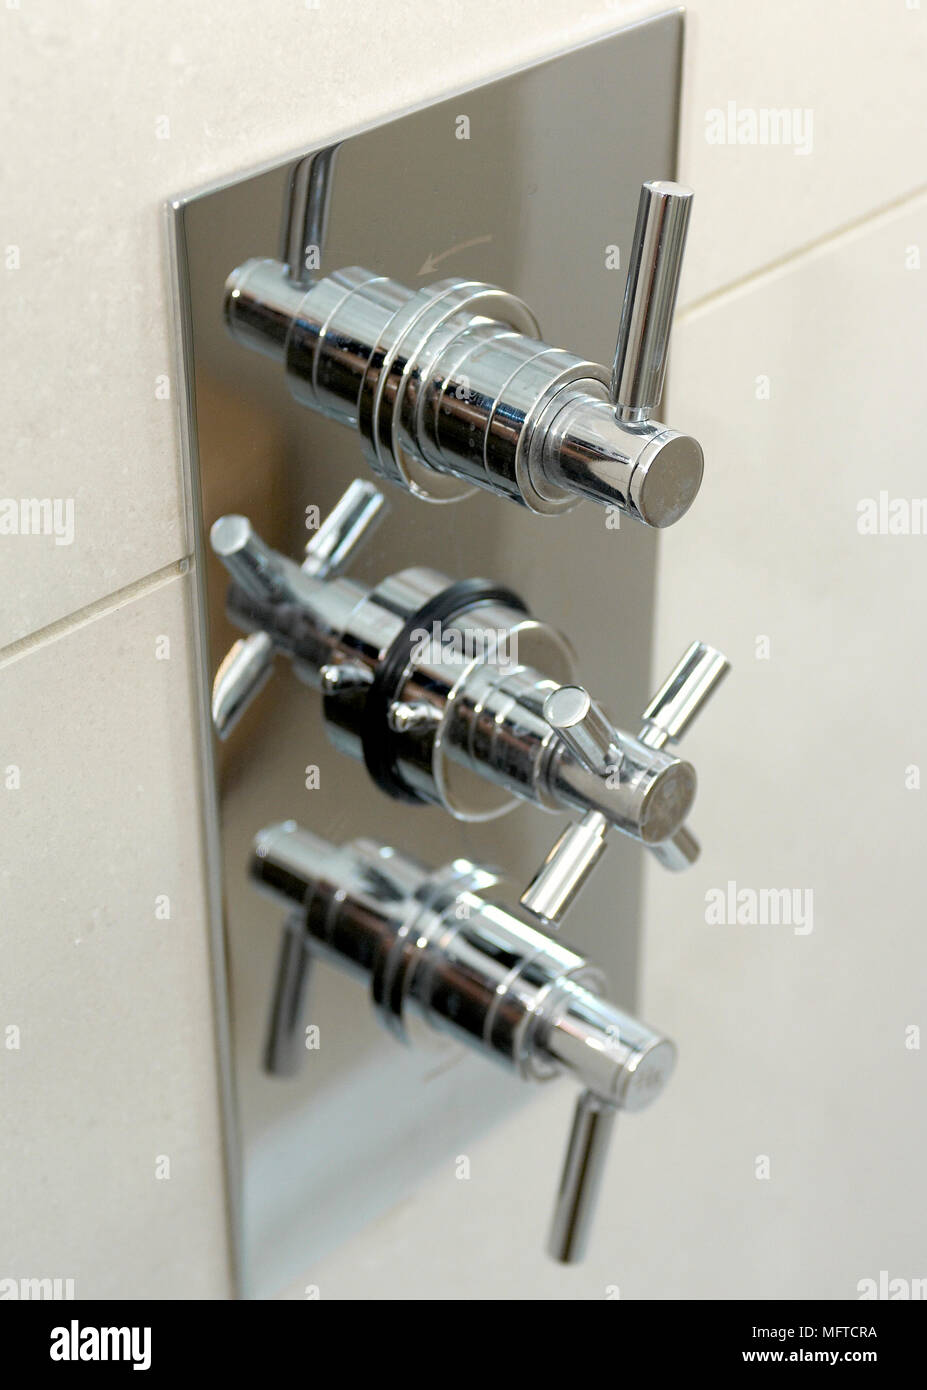 Mixer shower tap fitting Stock Photo